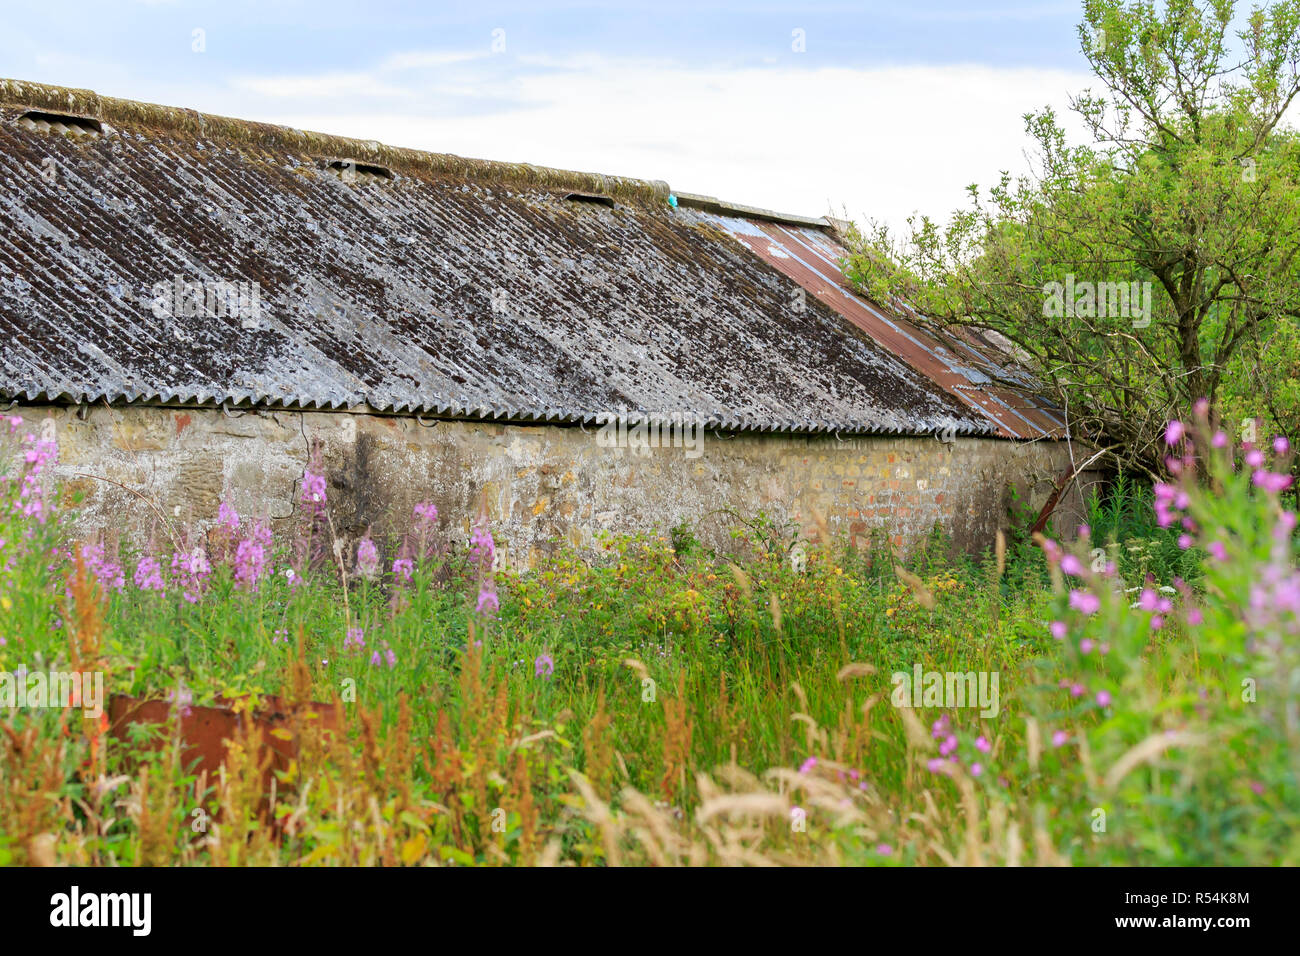 Old barn surrounded by wild flowers and long grasses Stock Photo